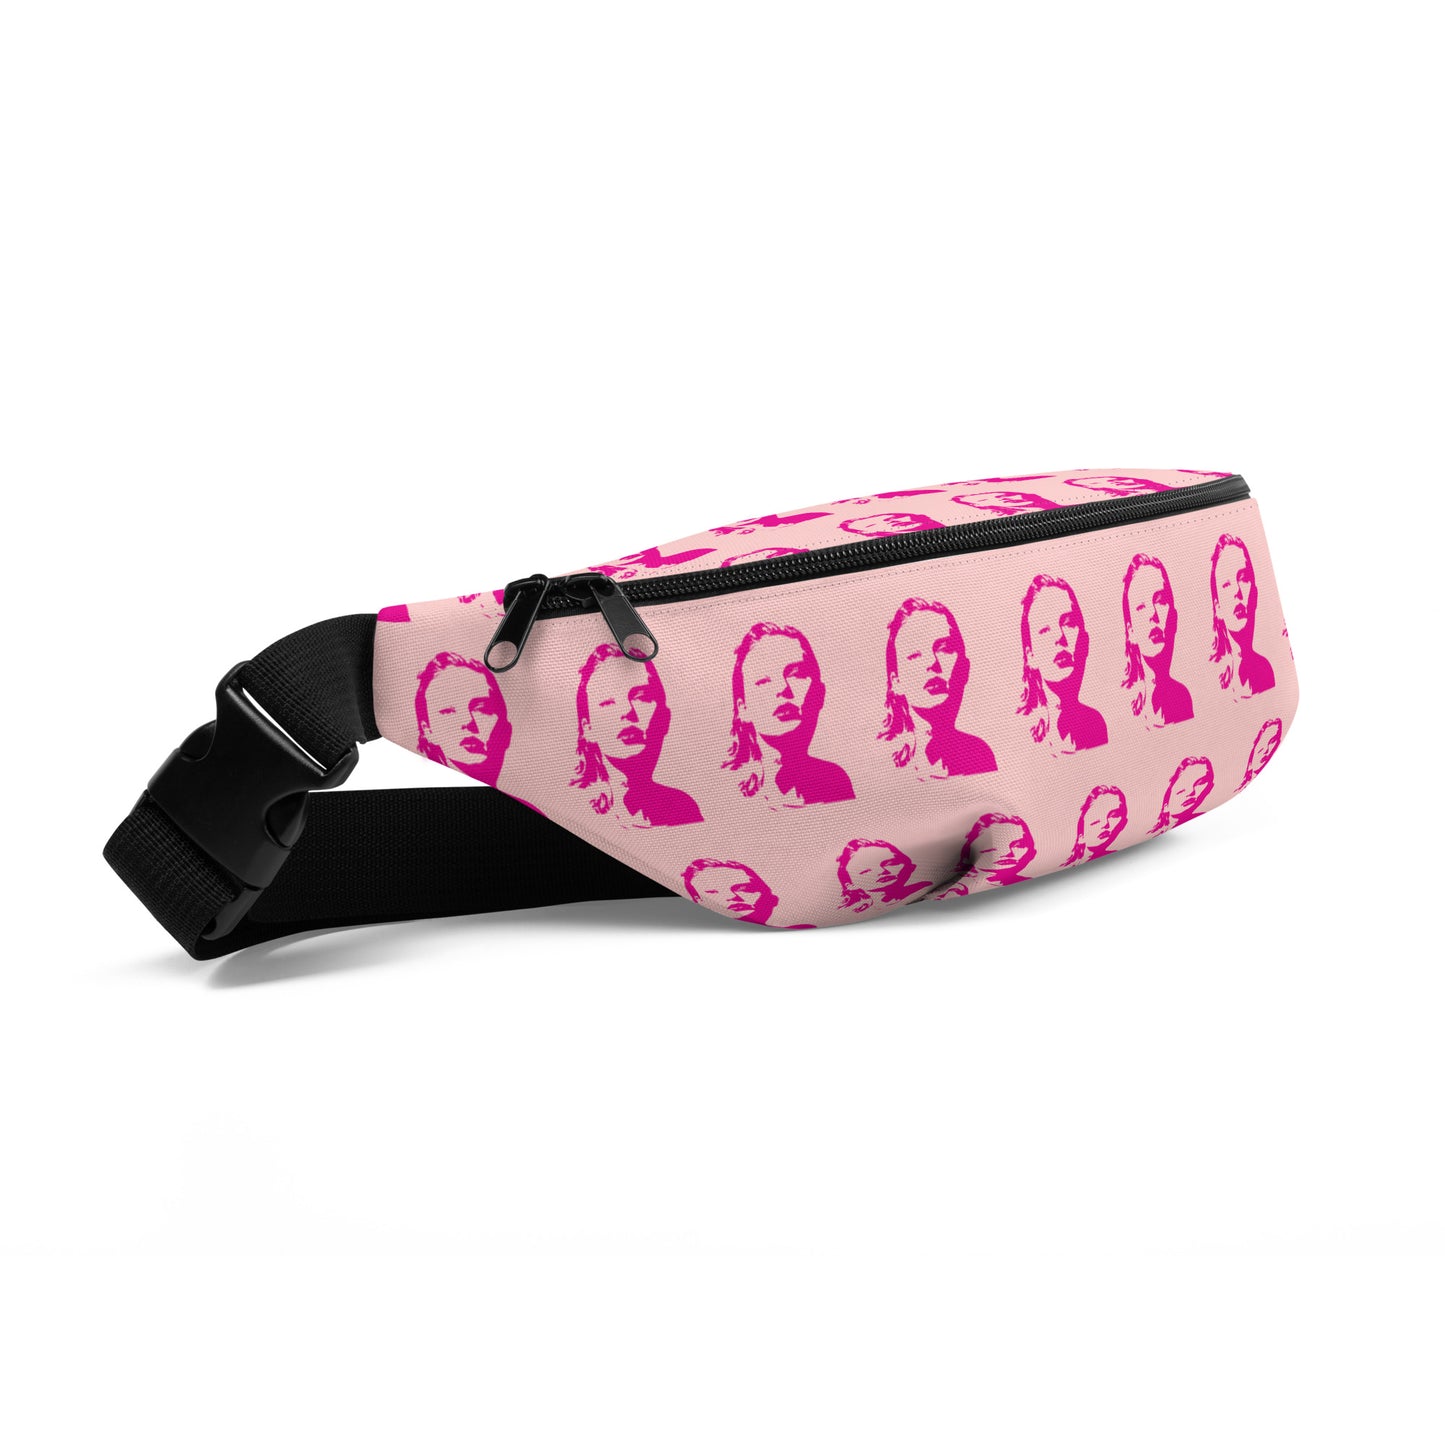 Swift Pattern Pink - Inspired By Taylor Swift - Sustainably Made Fanny Pack